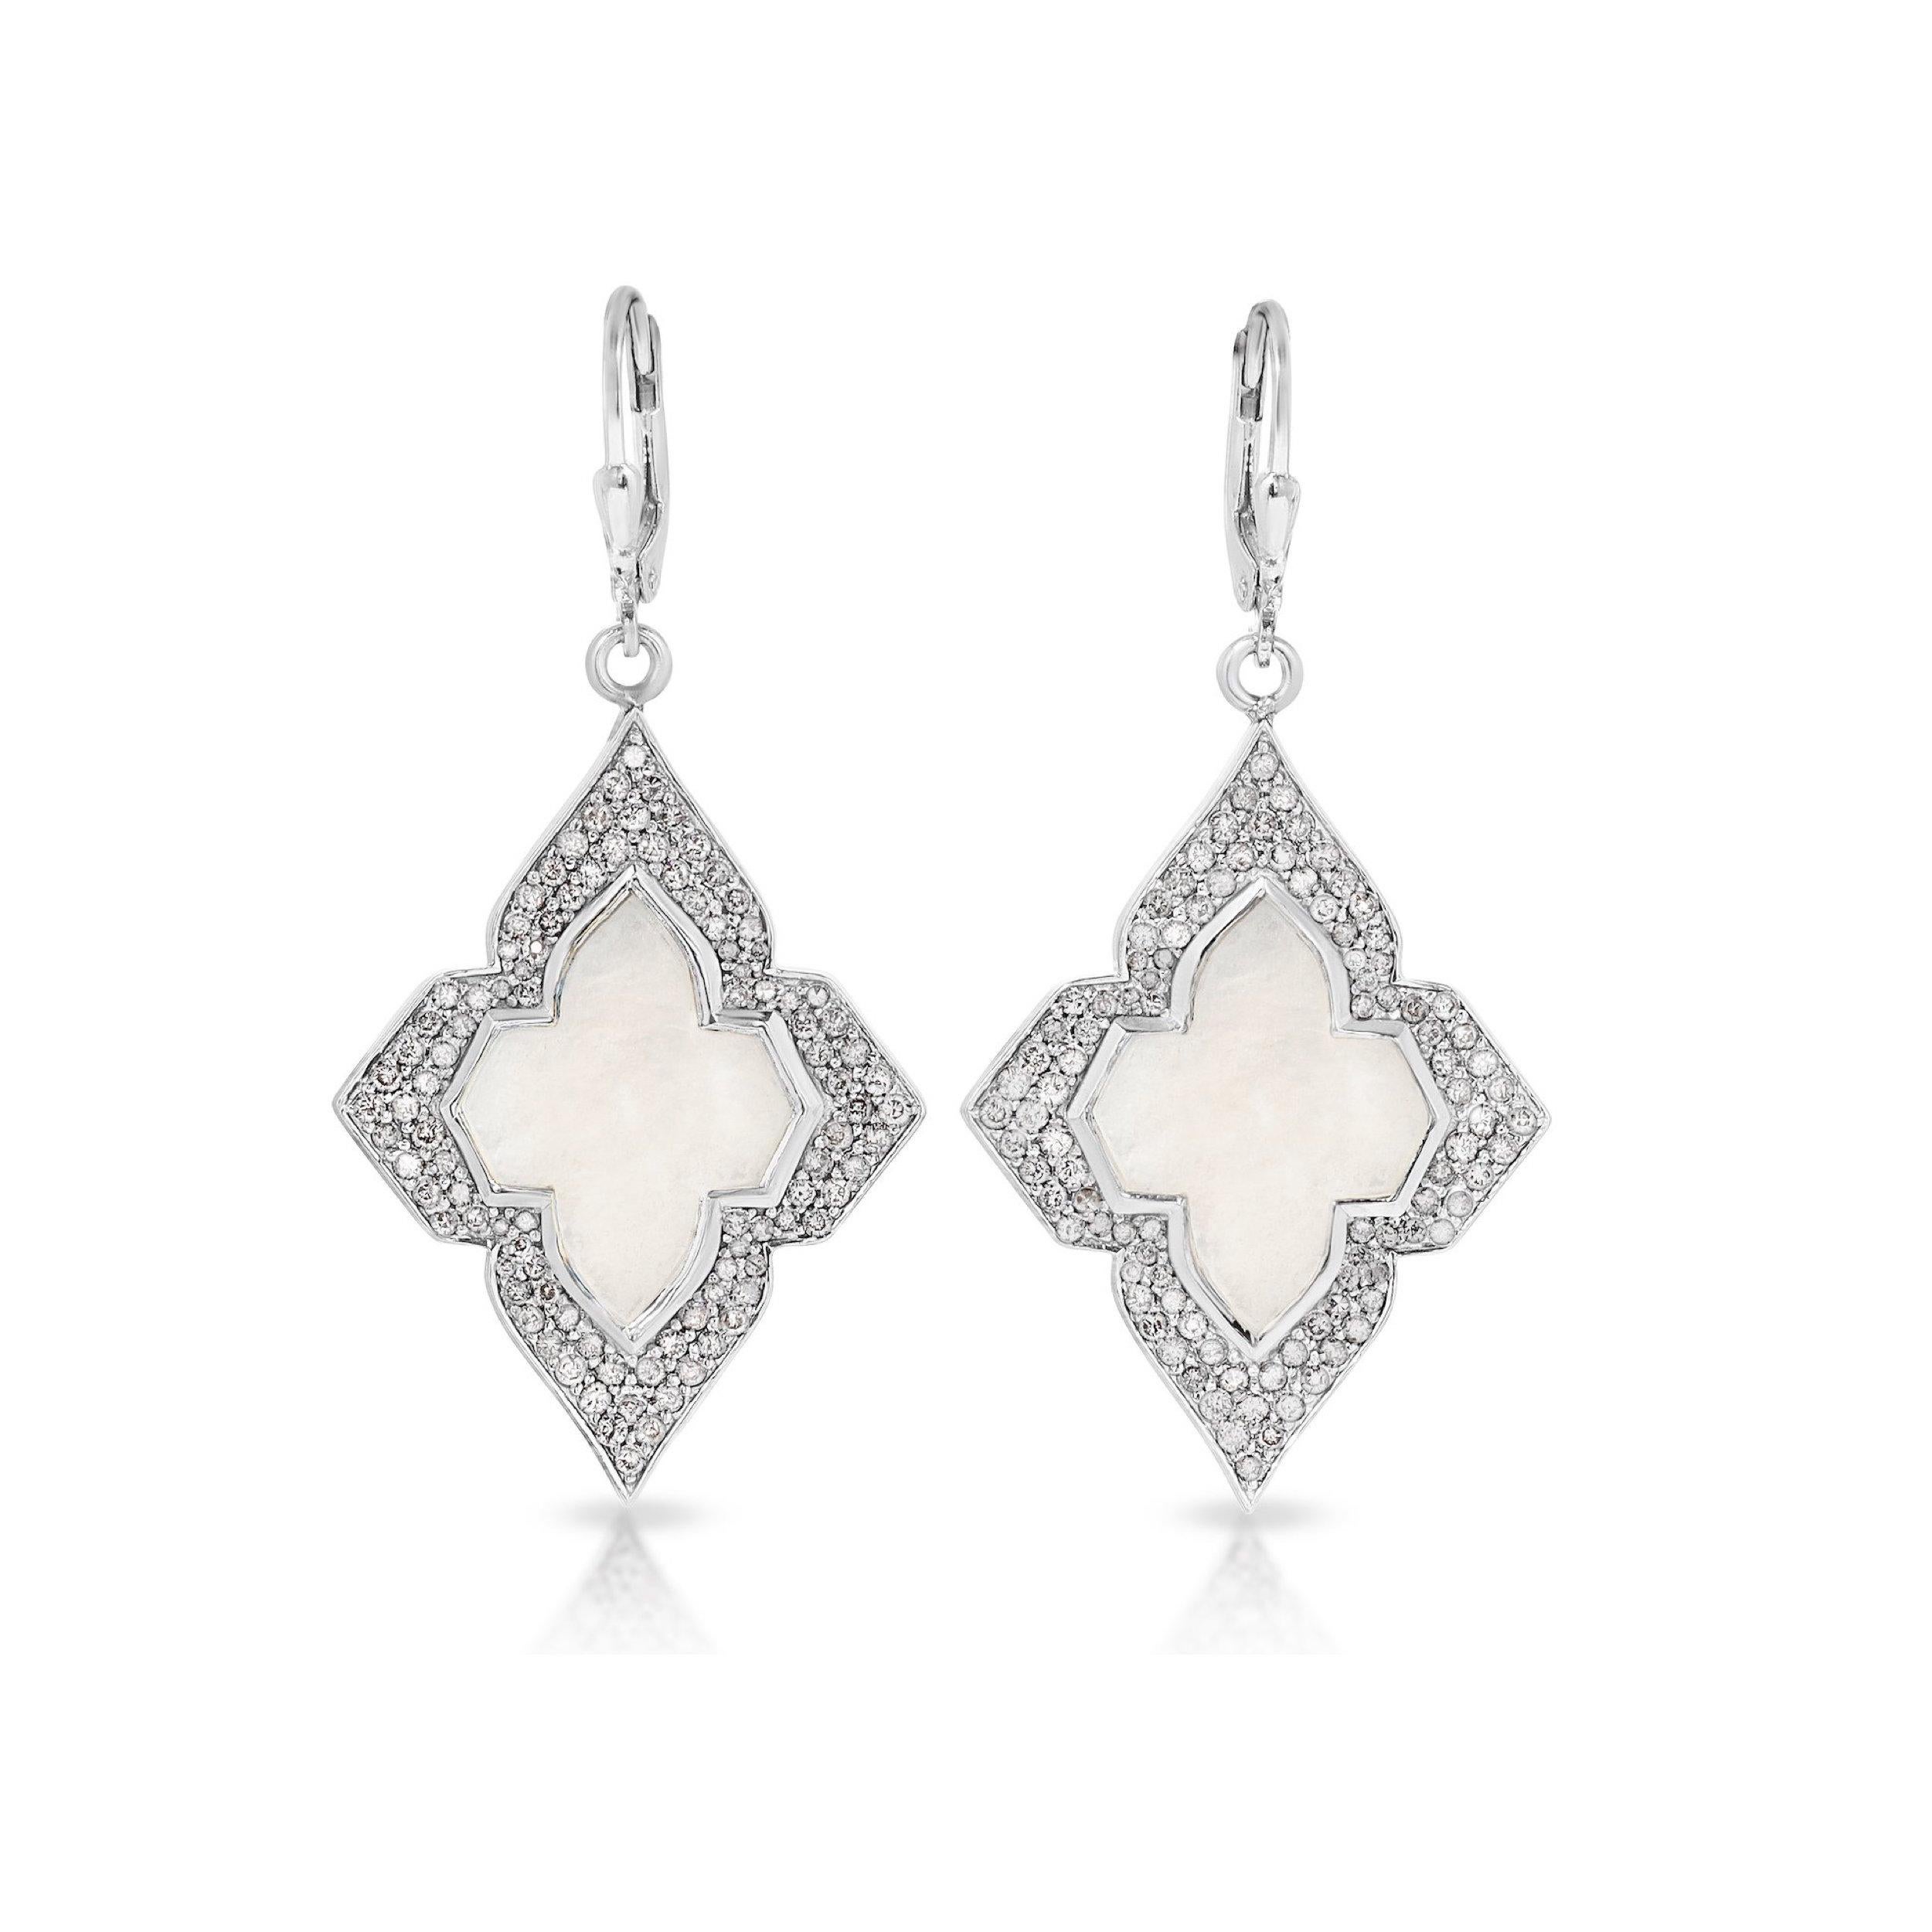 Beautiful drop earrings in a modern interpretation of the iconic Art Deco era in jewelry. These earrings feature milky, luminescent Mother of Pearl centers encased with sparkling White Diamonds set in fabulous earrings of Silver. These beautiful